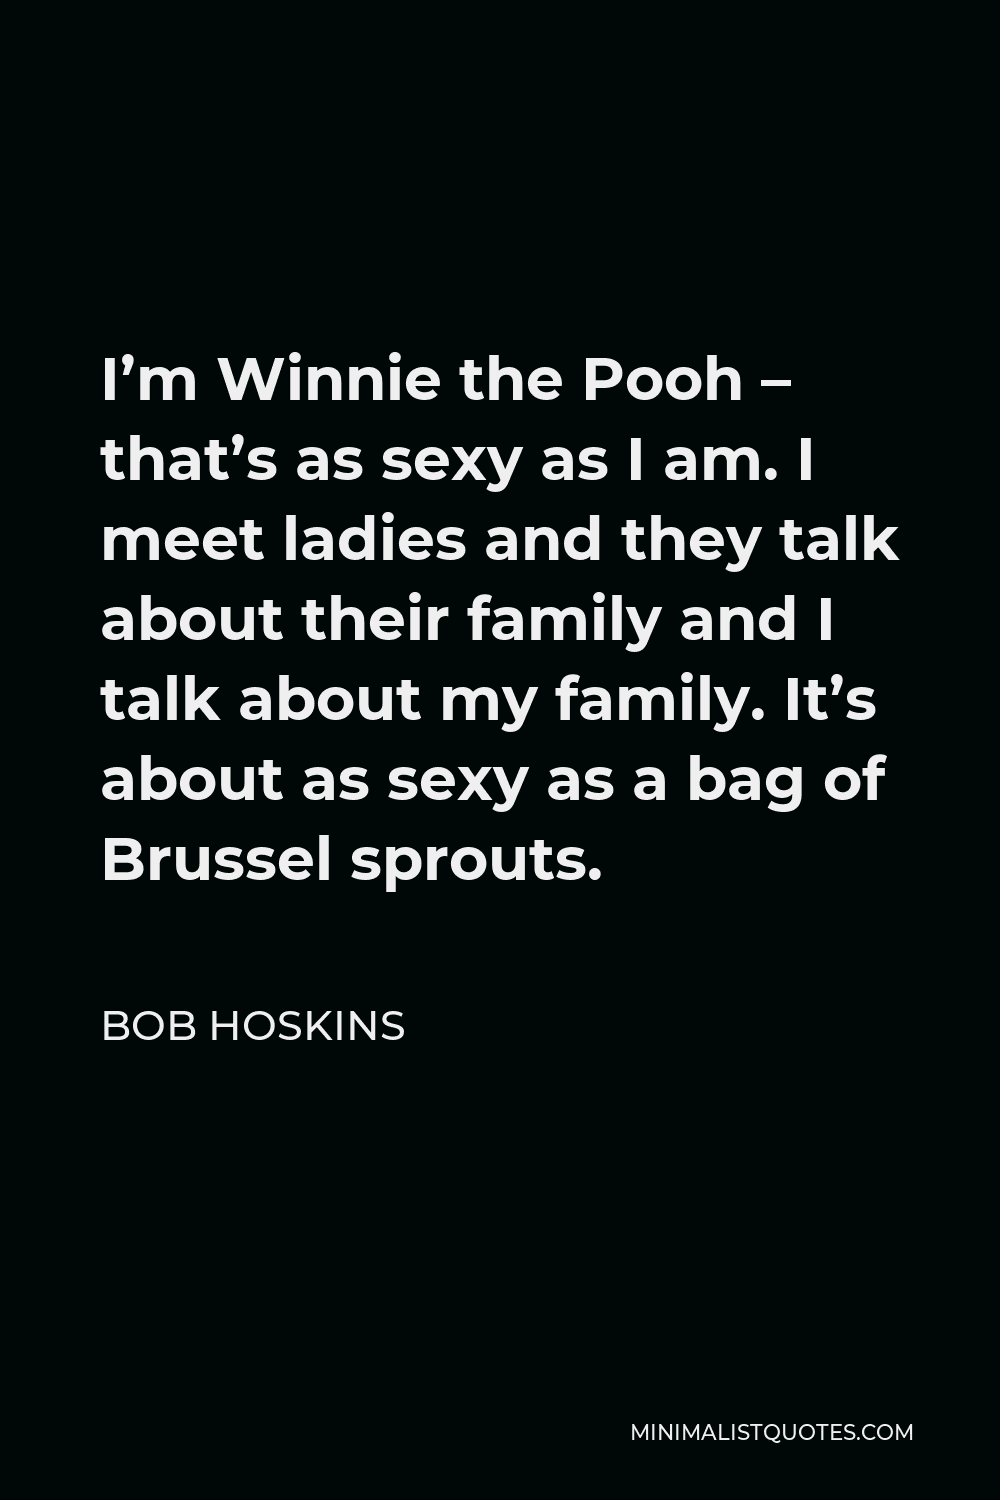 Bob Hoskins Quote - I’m Winnie the Pooh – that’s as sexy as I am. I meet ladies and they talk about their family and I talk about my family. It’s about as sexy as a bag of Brussel sprouts.